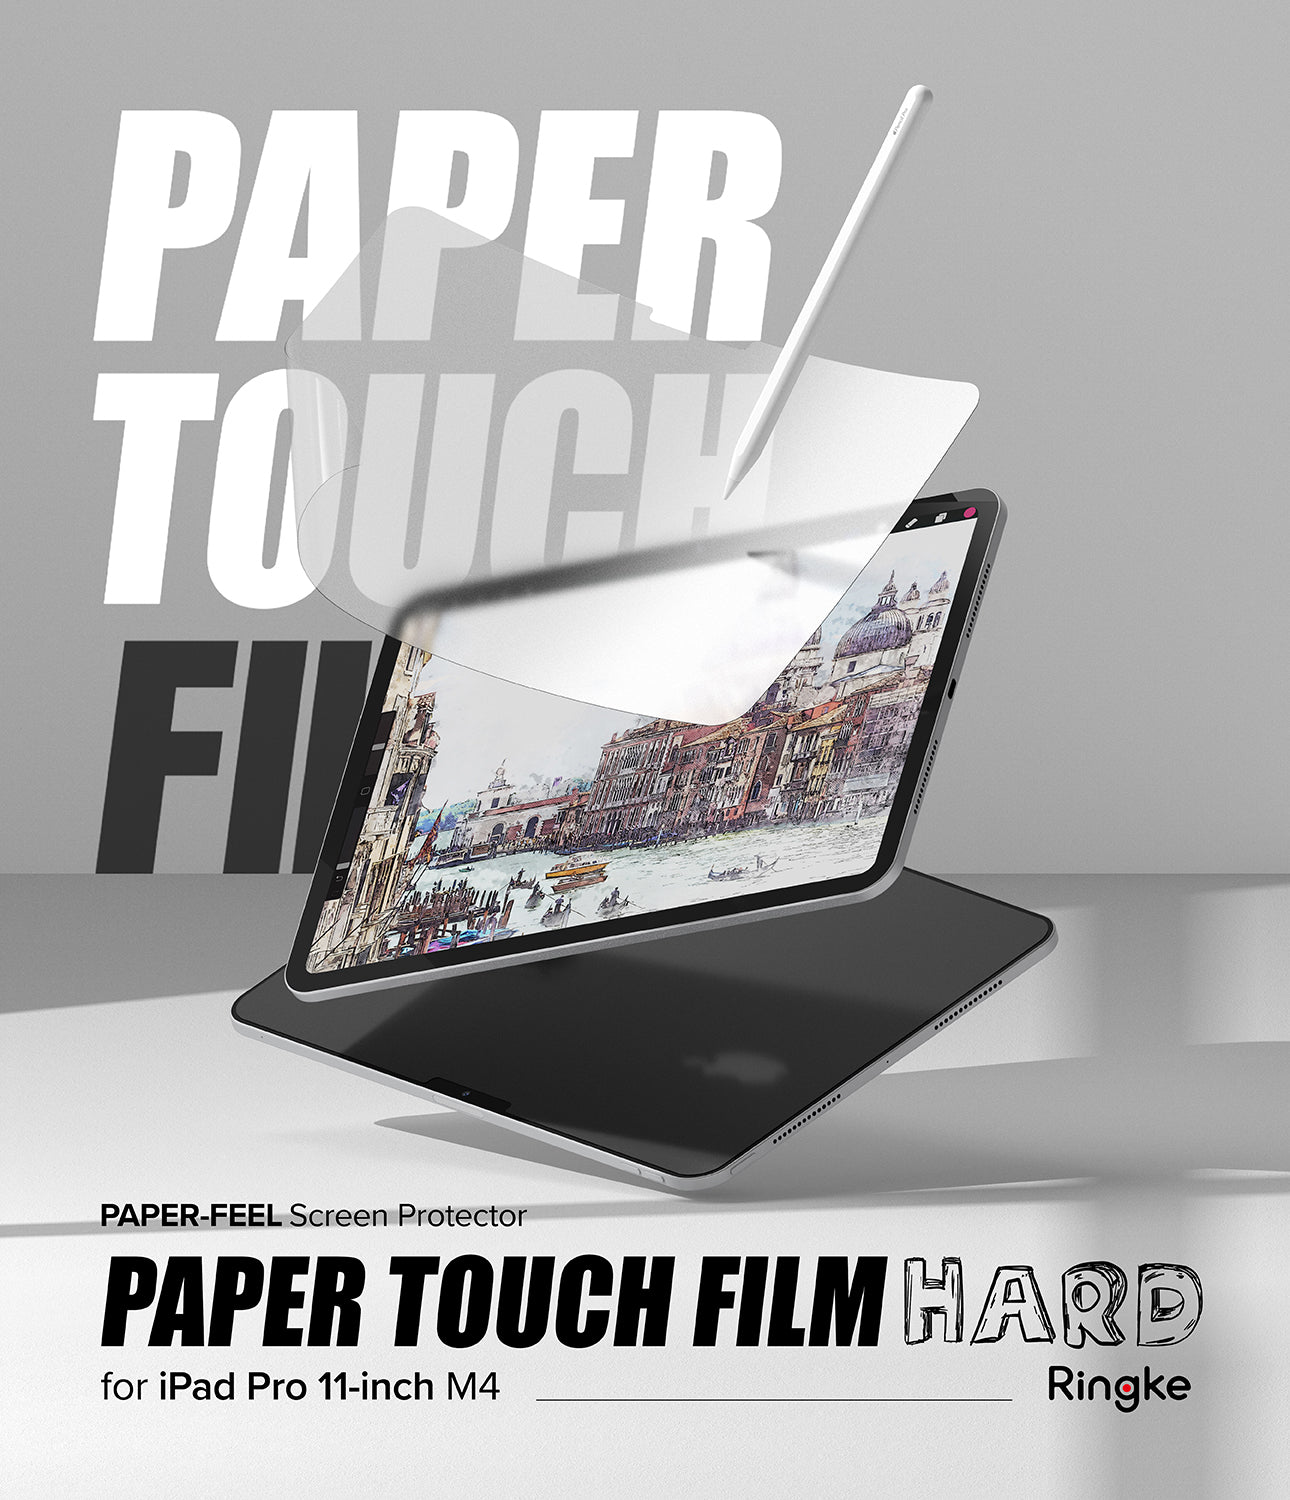 iPad Pro 11" (M4) Screen Protector | Paper Touch Film - By Ringke